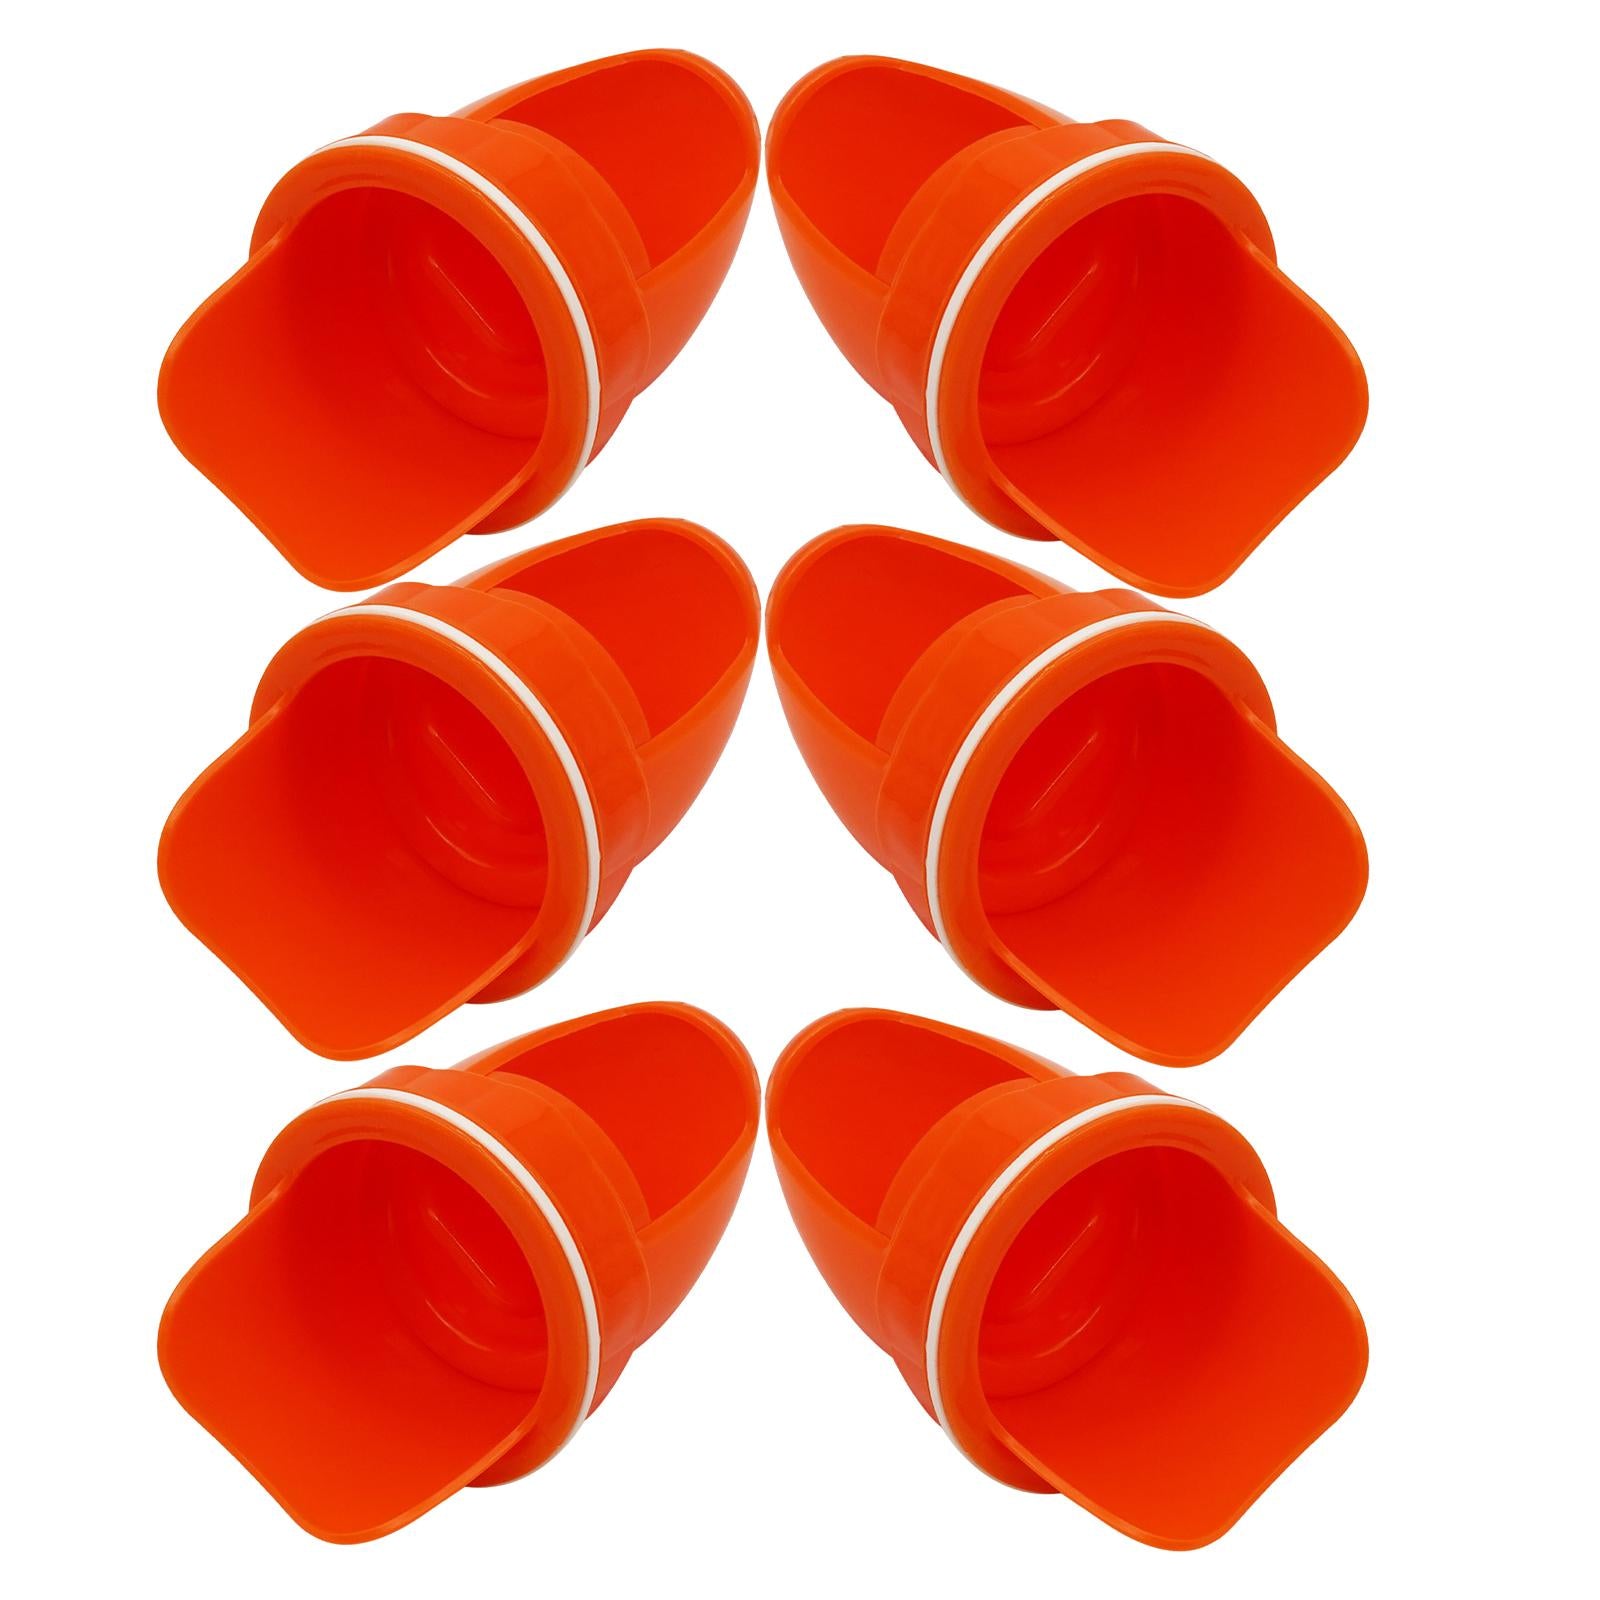 6 Pieces Automatic Poultry Feeder Reusable No Waste for Chicken Barrels Bins Orange